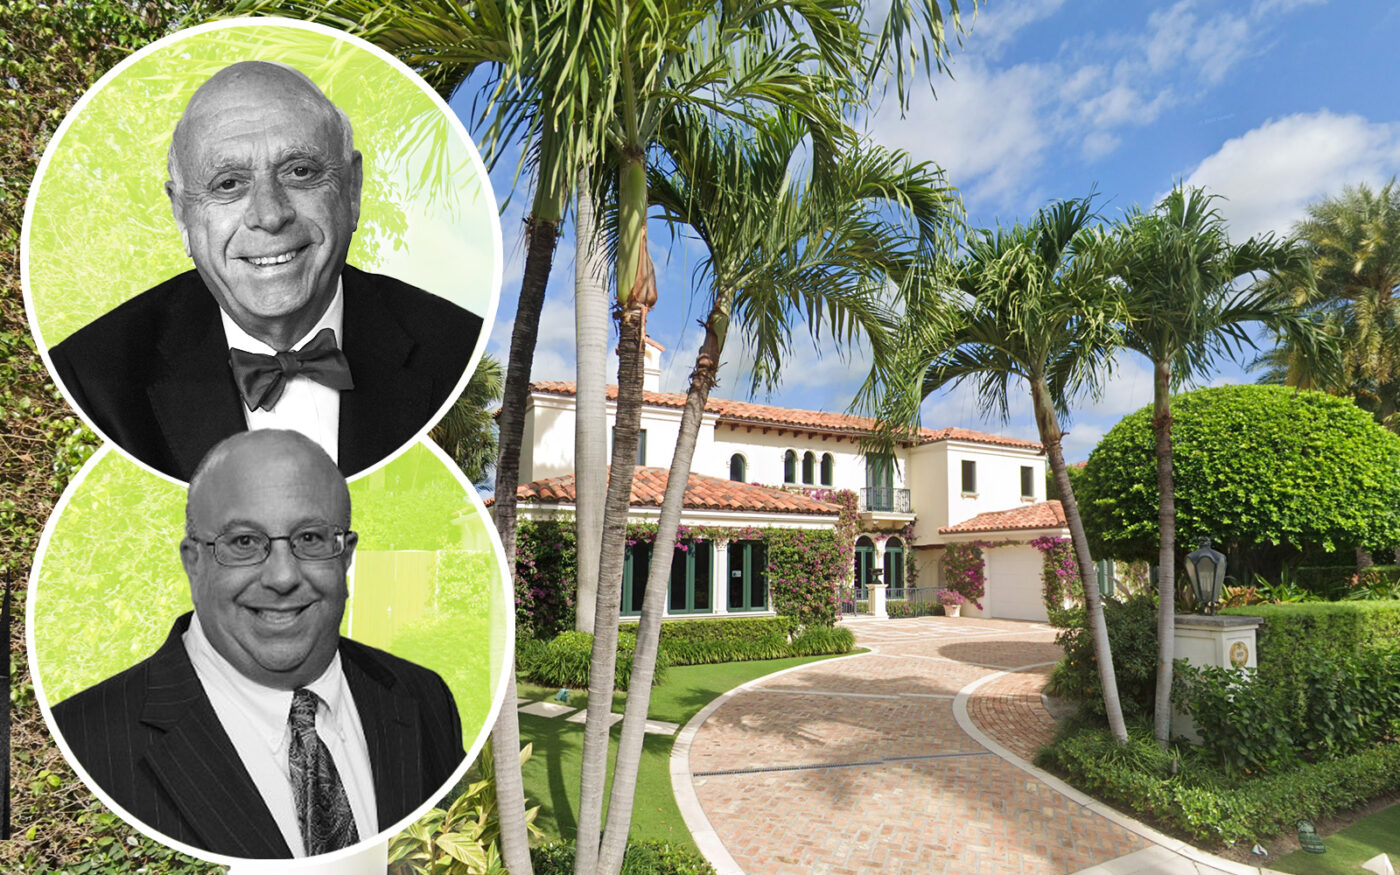 569 Island Drive in Palm Beach with Related Co's Bruce A. Beal Sr. and Mark Biondi